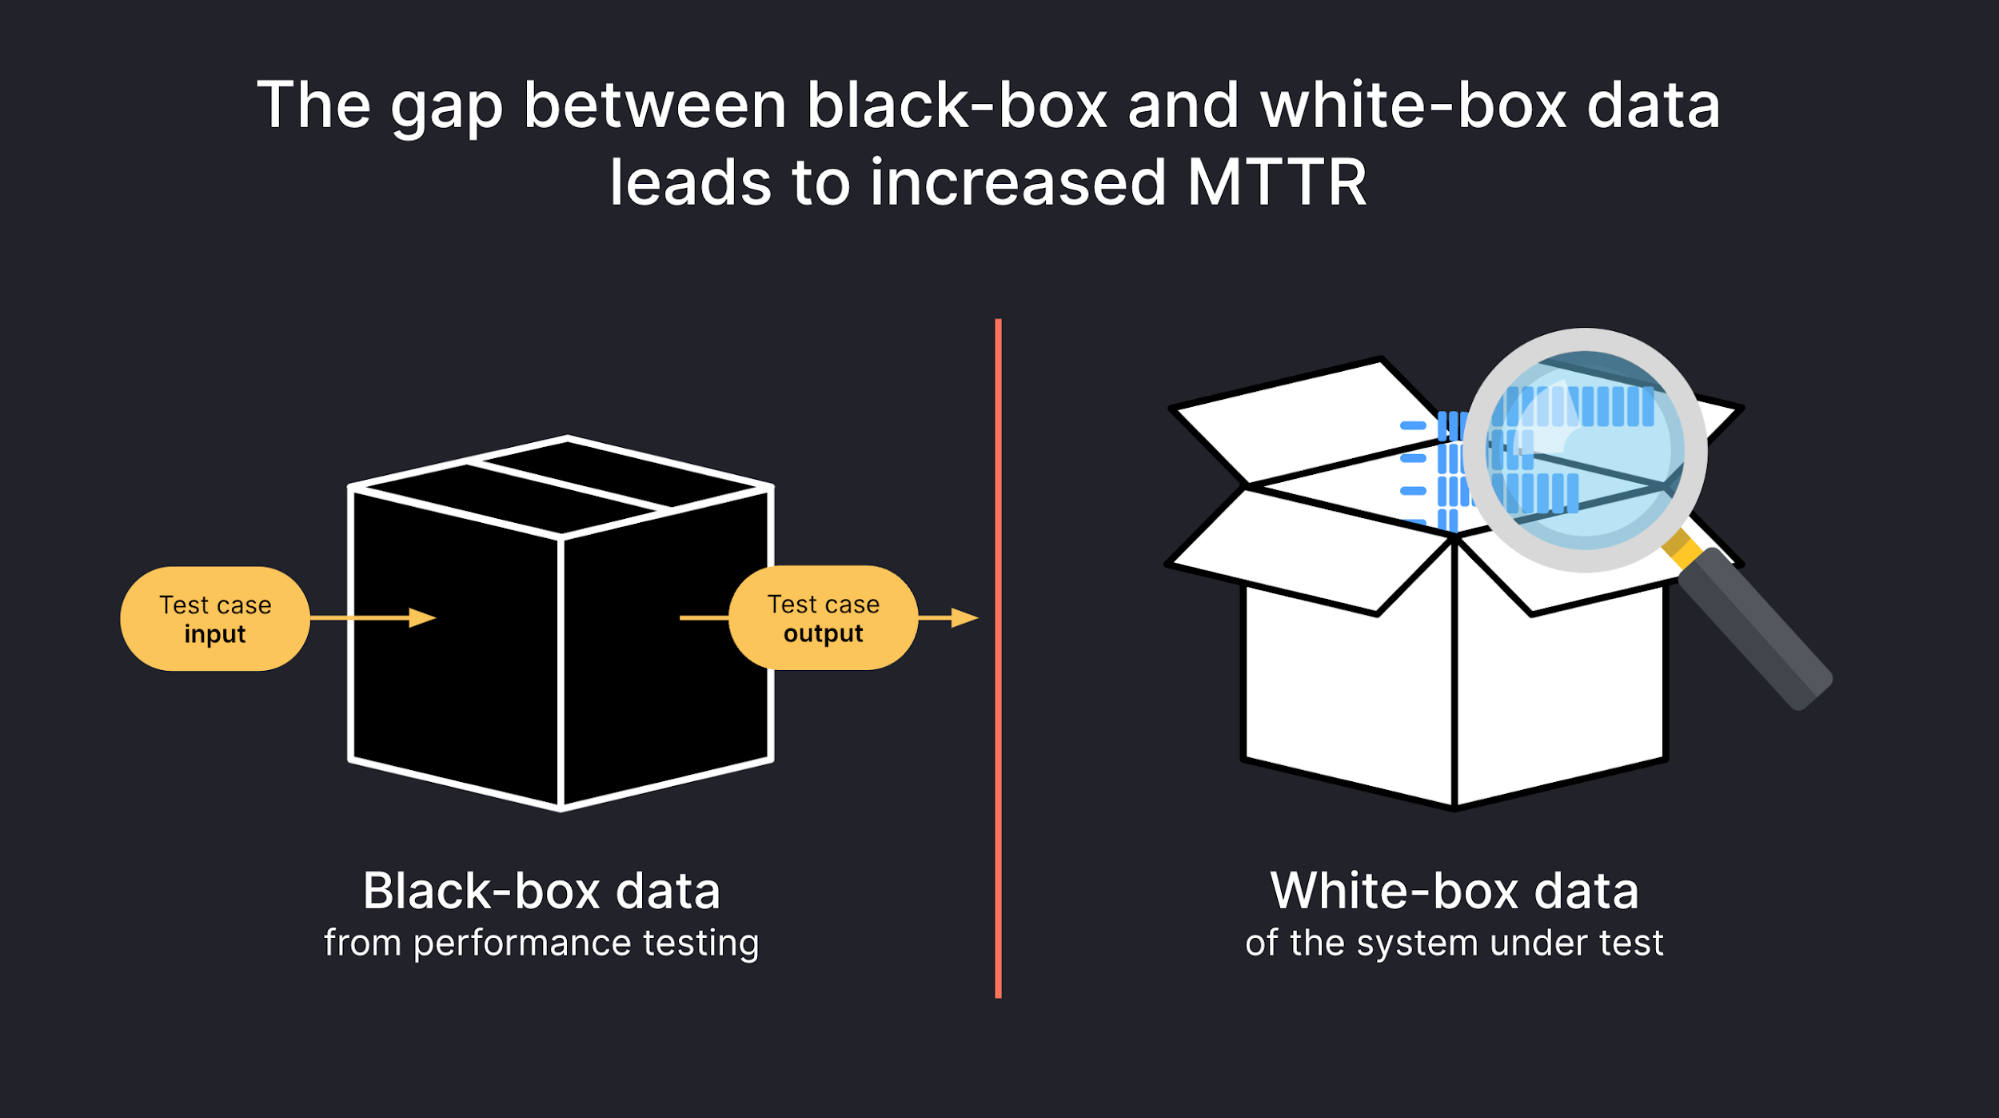 An image that illustrates the gap between blackbox and whitebox data